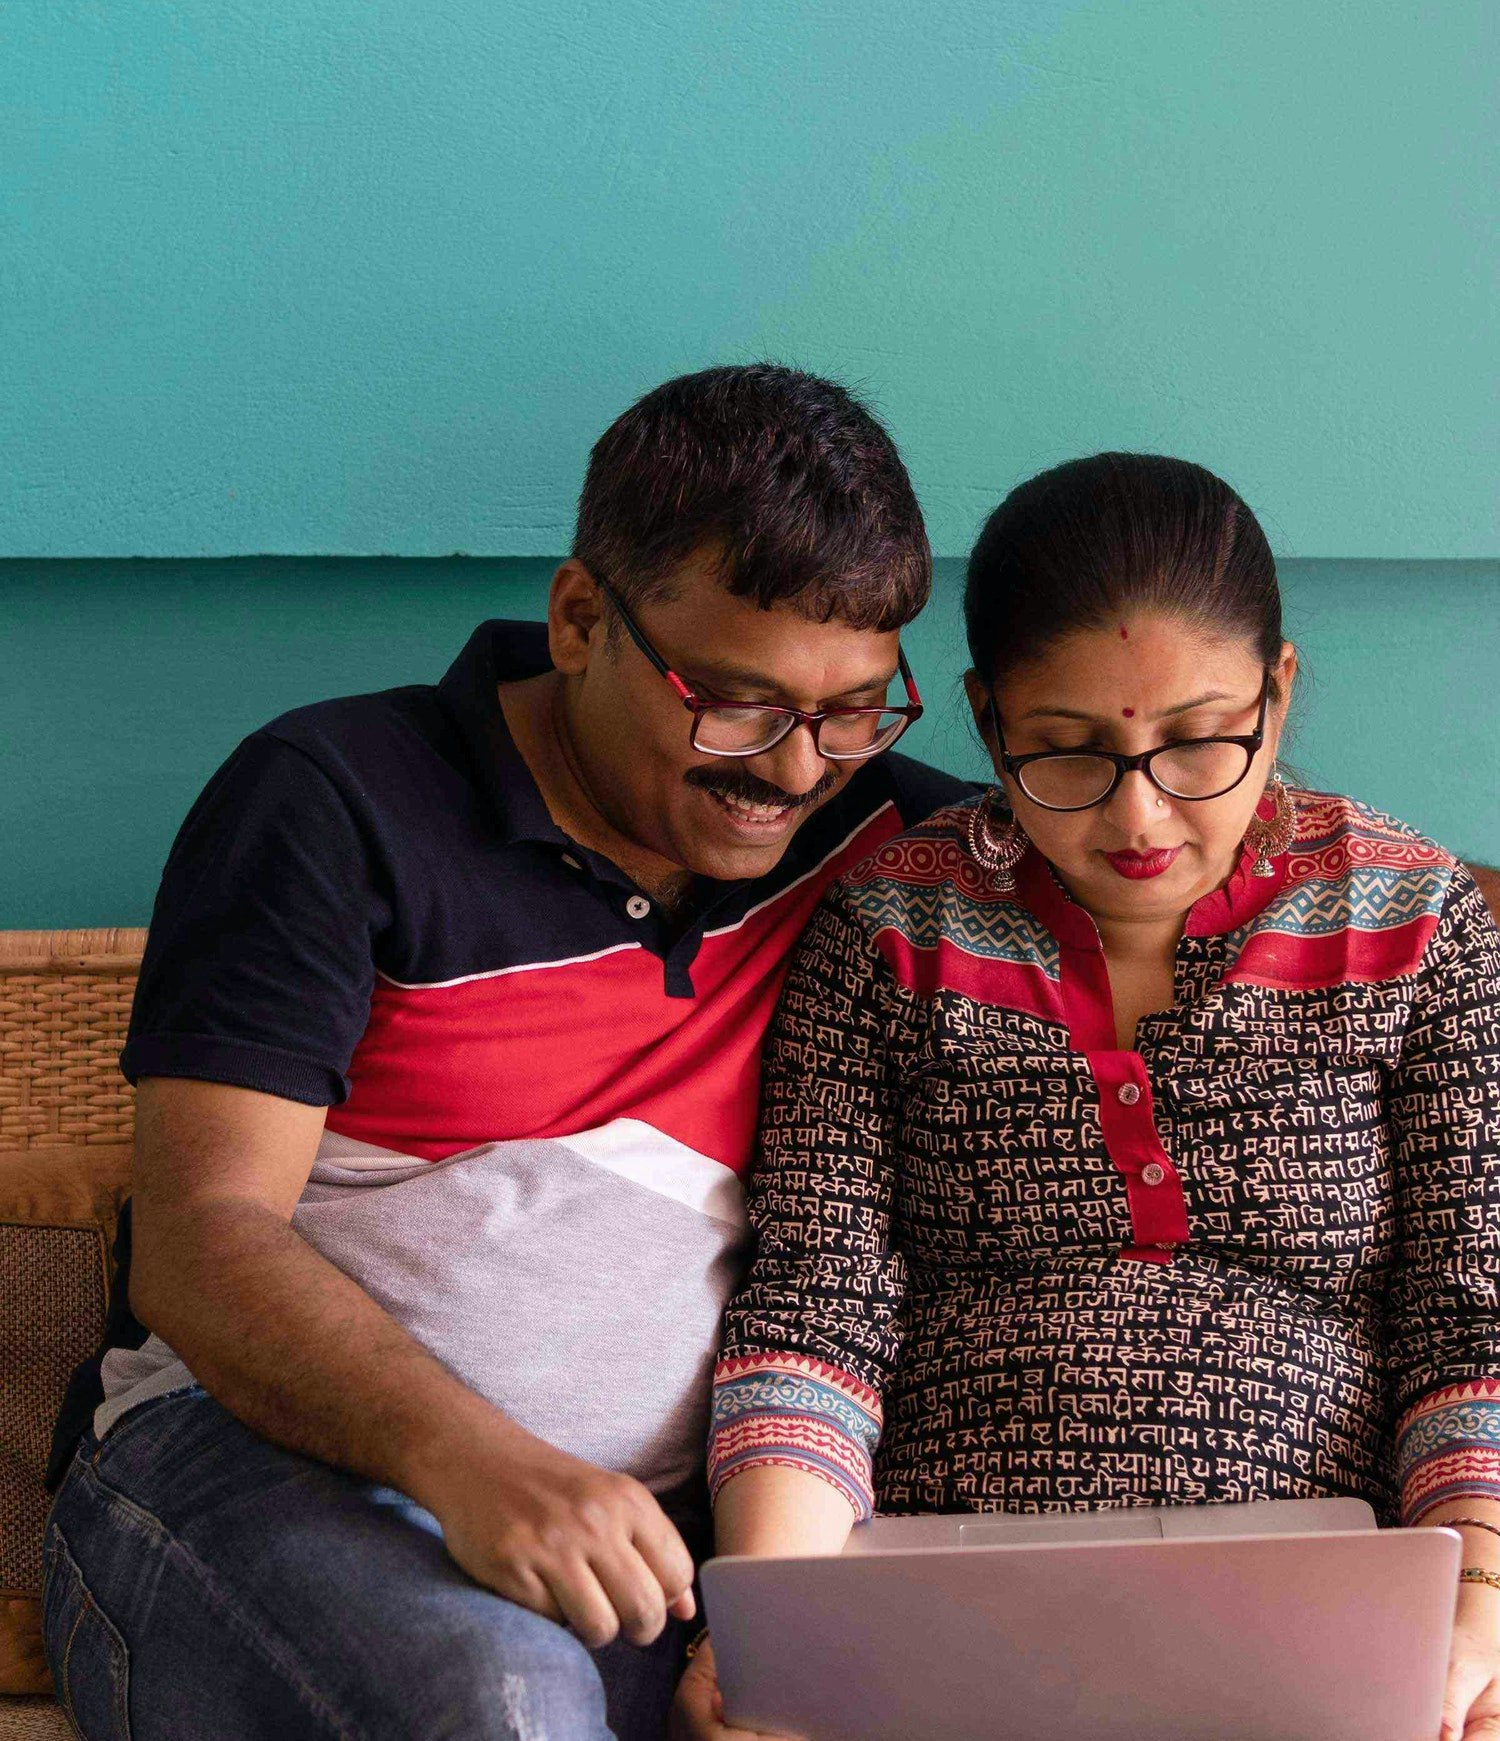 Couple in New Delhi, India looking at computer together